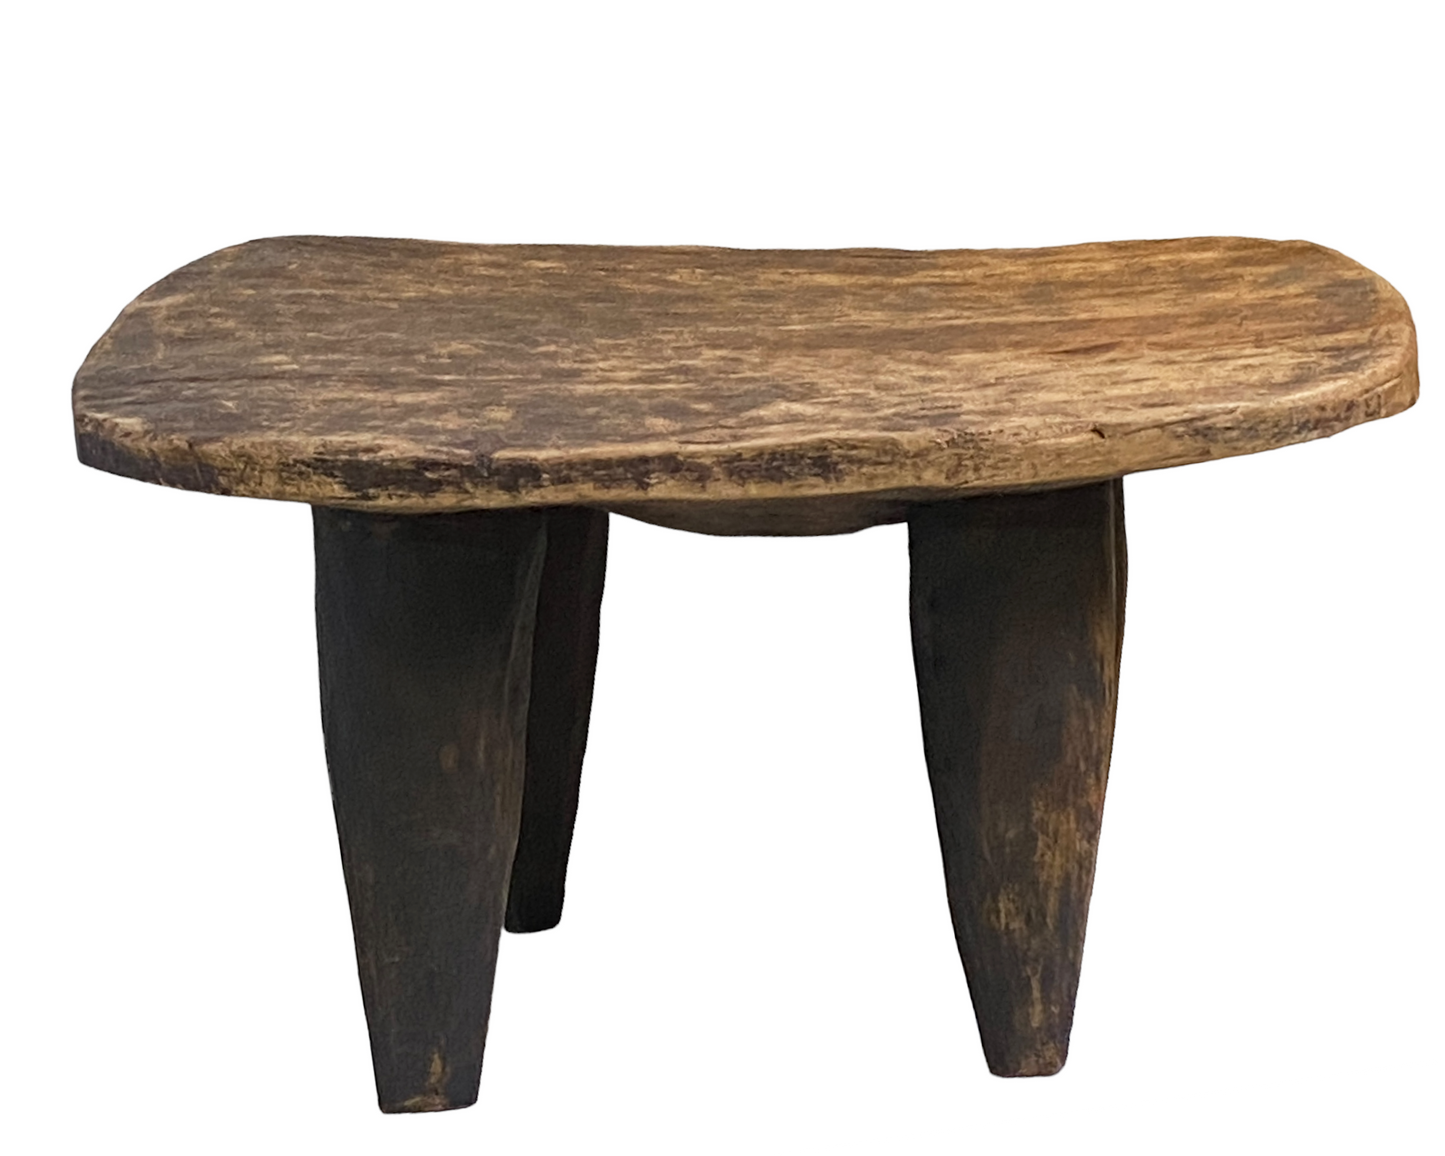 # 4963 Superb Rustic Old  African Senufo Stool / Table  I coast 25" W by 14.5" H